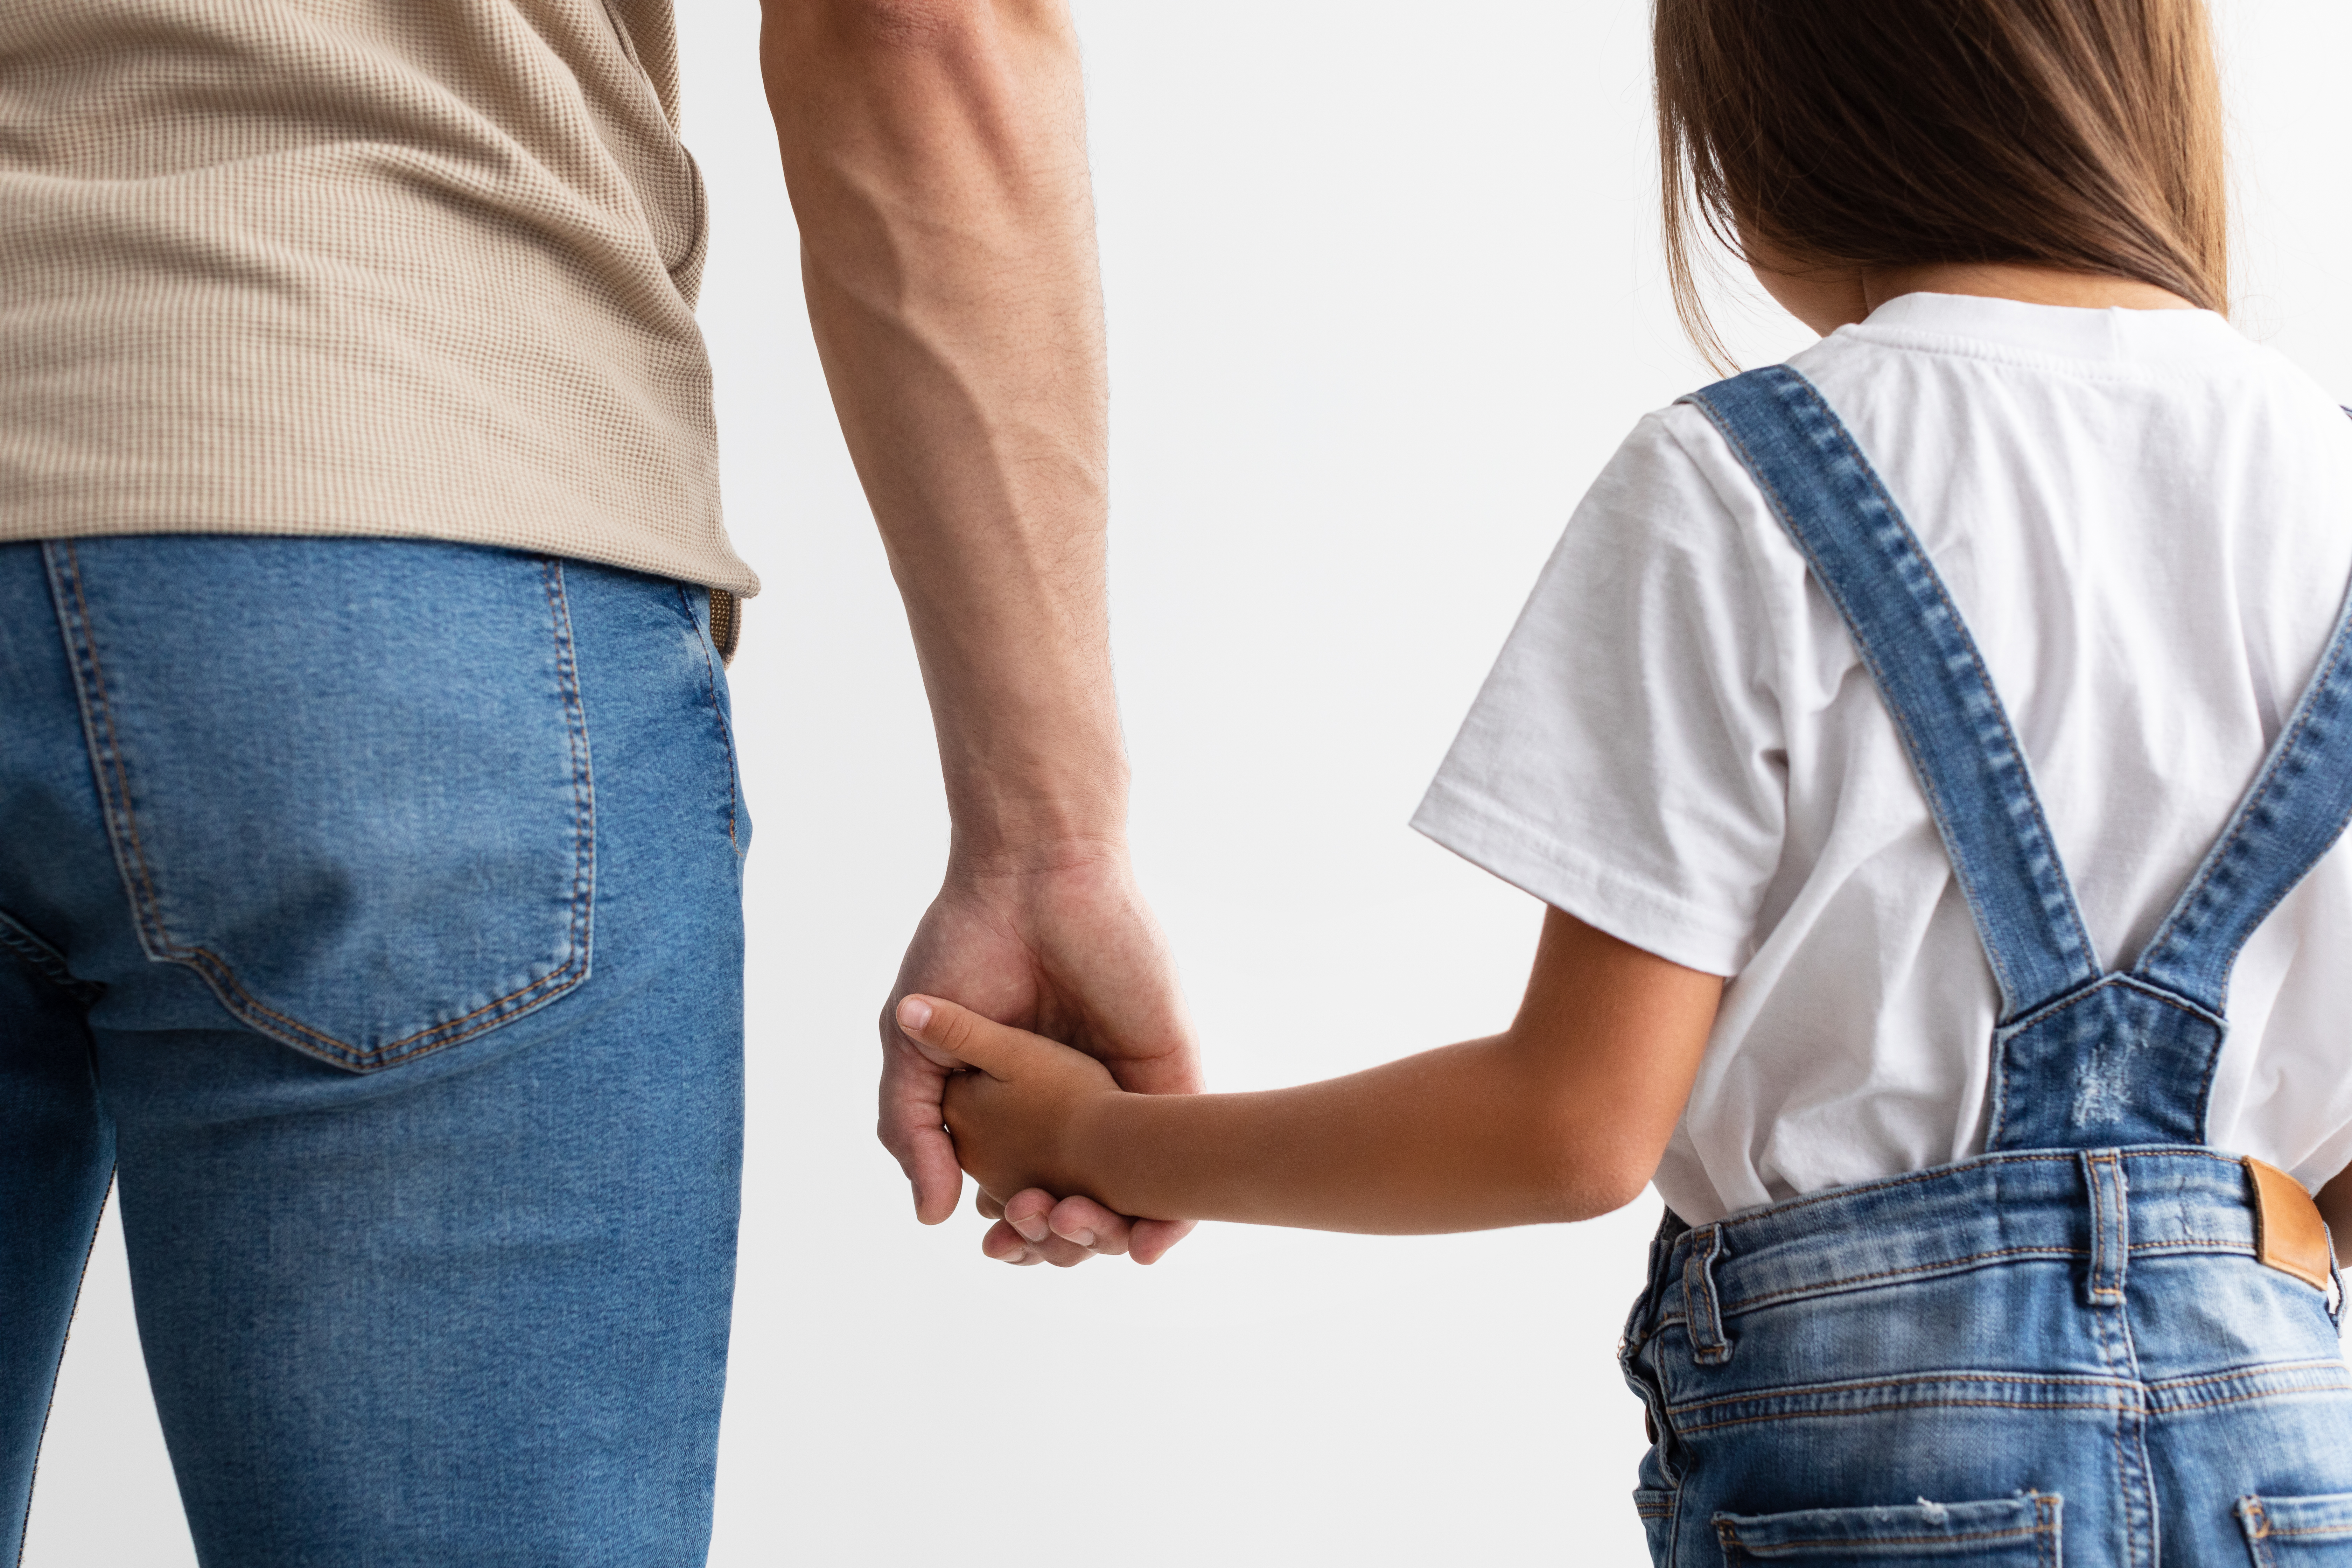 Your Spouse Left the State with Your Kids: What’s Next?